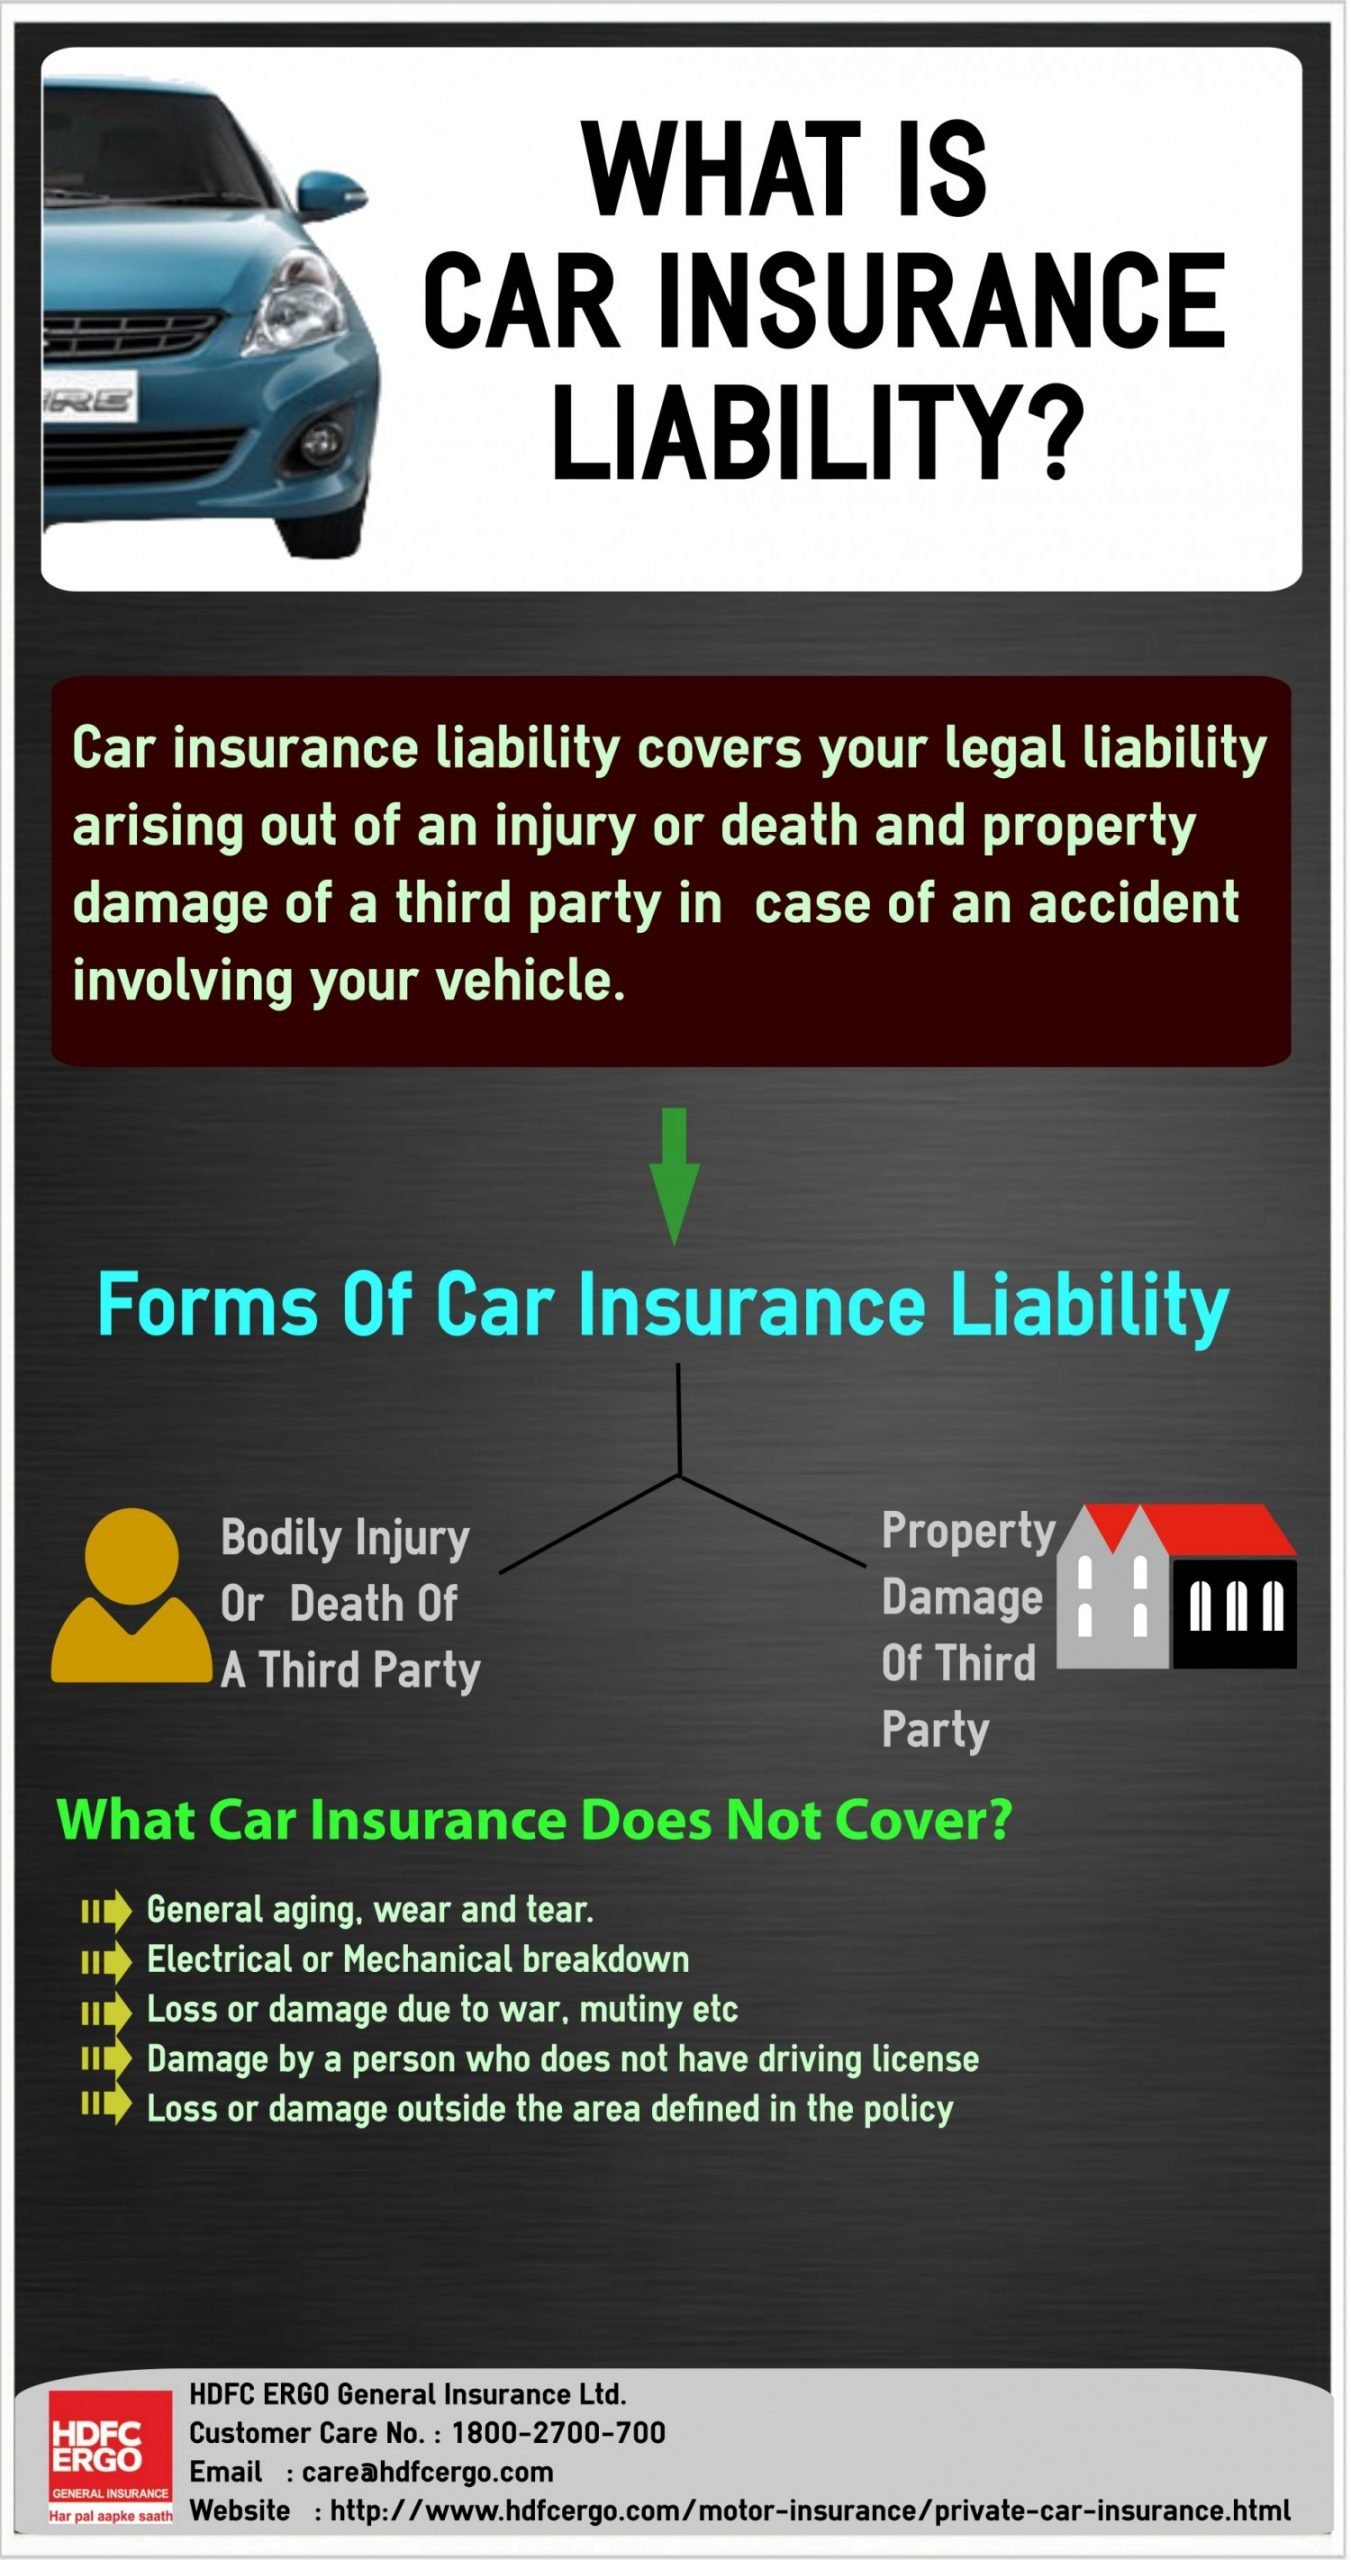 What Is Car Insurance Liability?